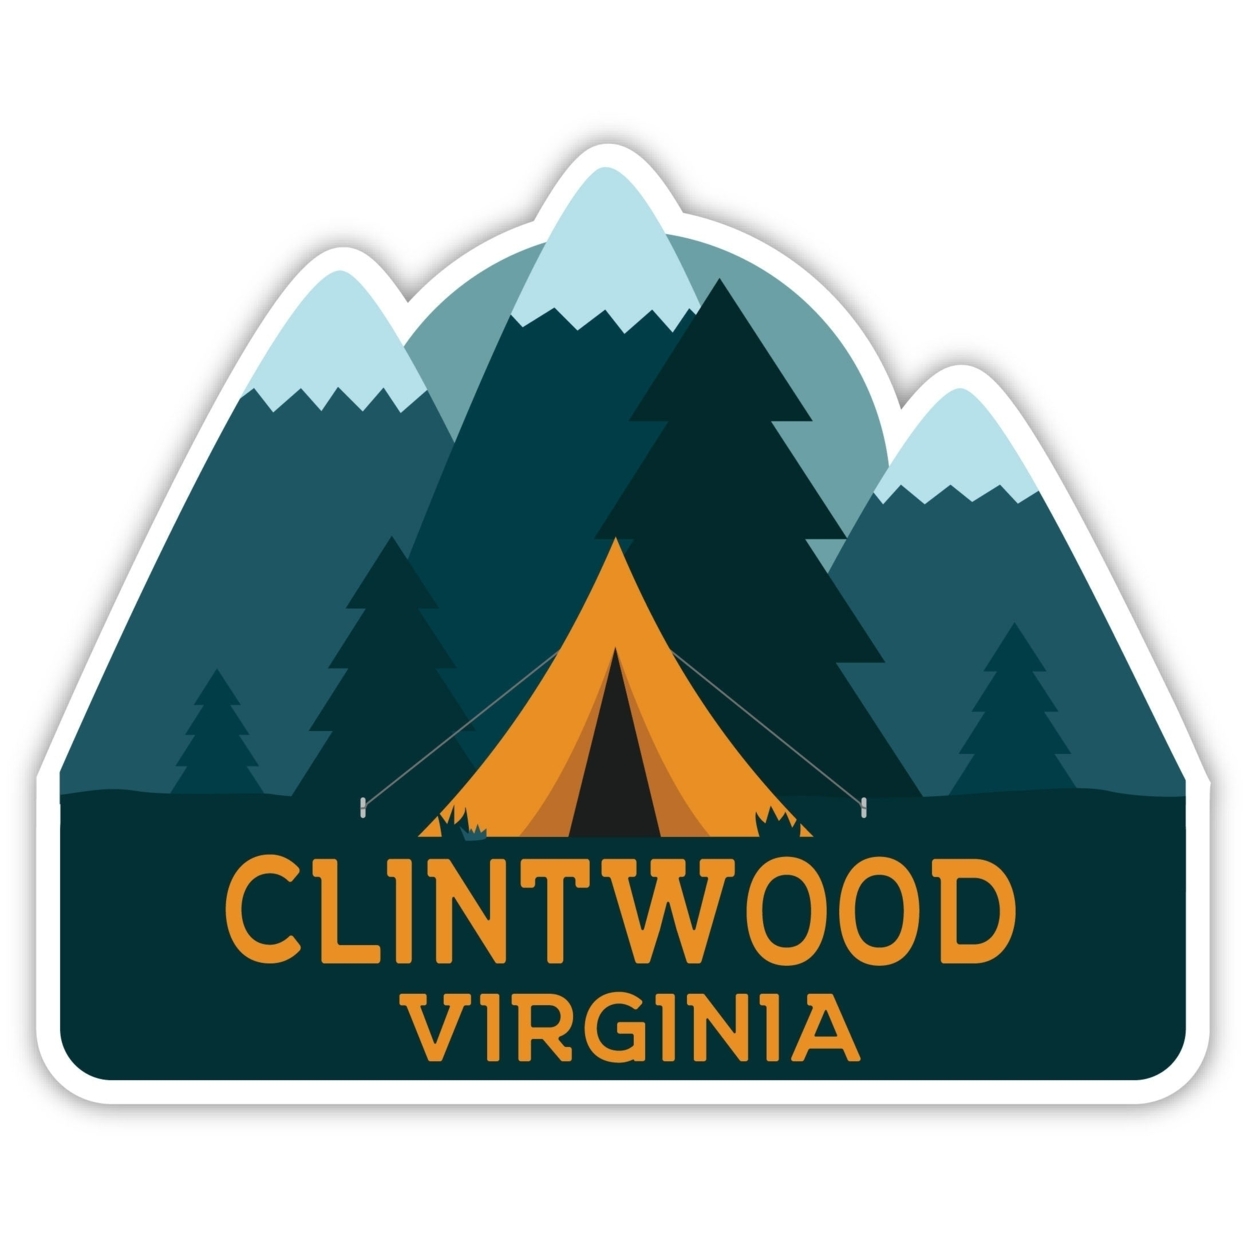 Clintwood Virginia Souvenir Decorative Stickers (Choose Theme And Size) - 4-Pack, 10-Inch, Tent